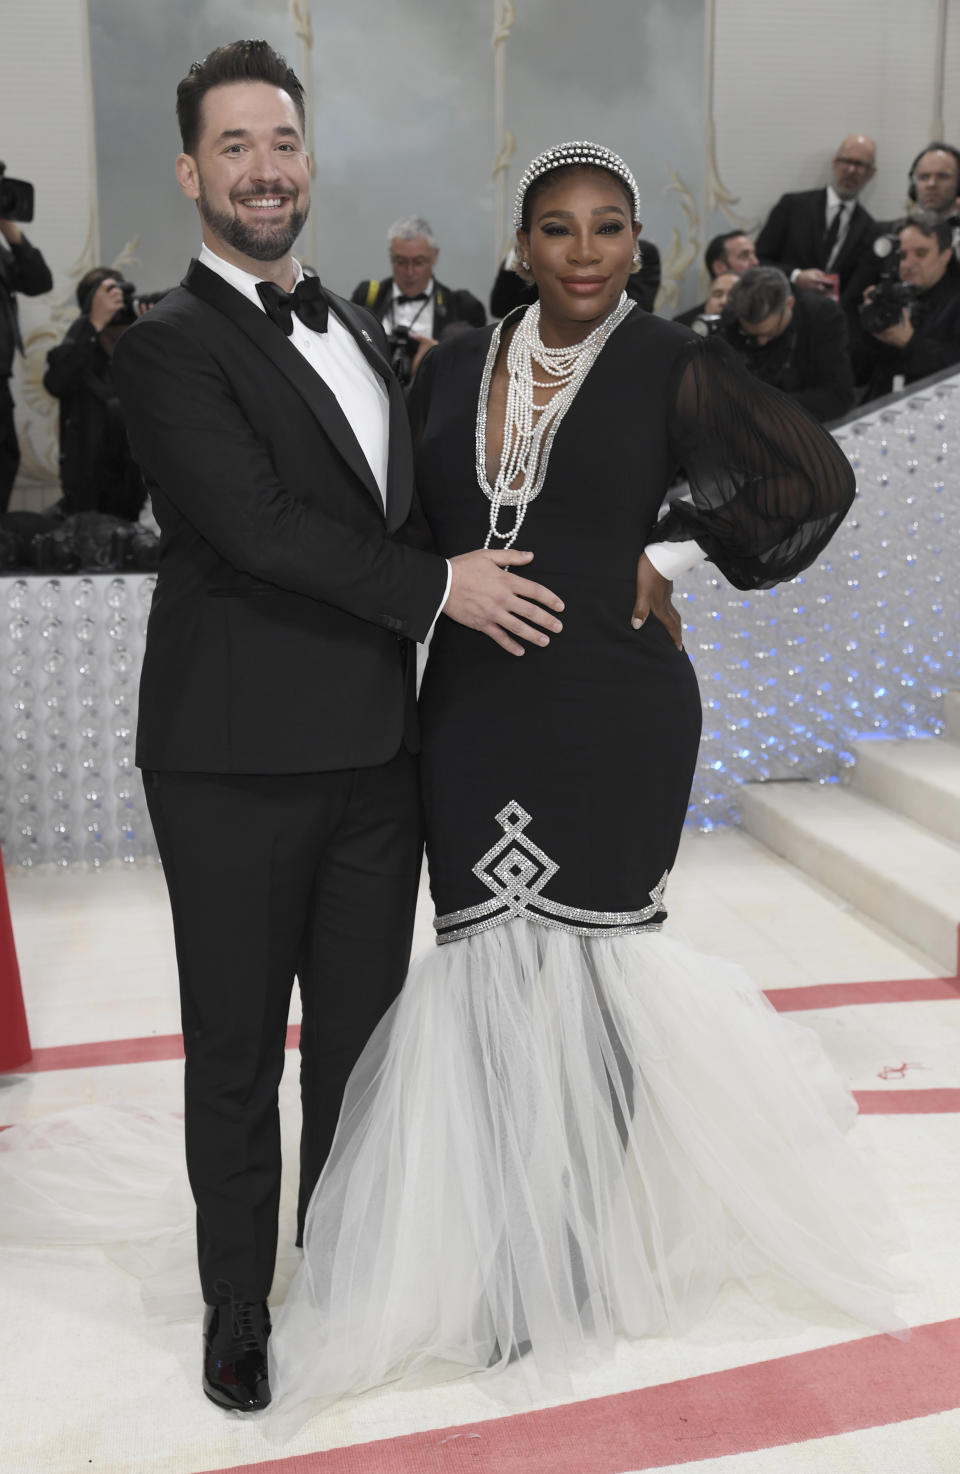 Alexis Ohanian, left, and Serena Williams attend The Metropolitan Museum of Art's Costume Institute benefit gala celebrating the opening of the "Karl Lagerfeld: A Line of Beauty" exhibition on Monday, May 1, 2023, in New York. (Photo by Evan Agostini/Invision/AP)